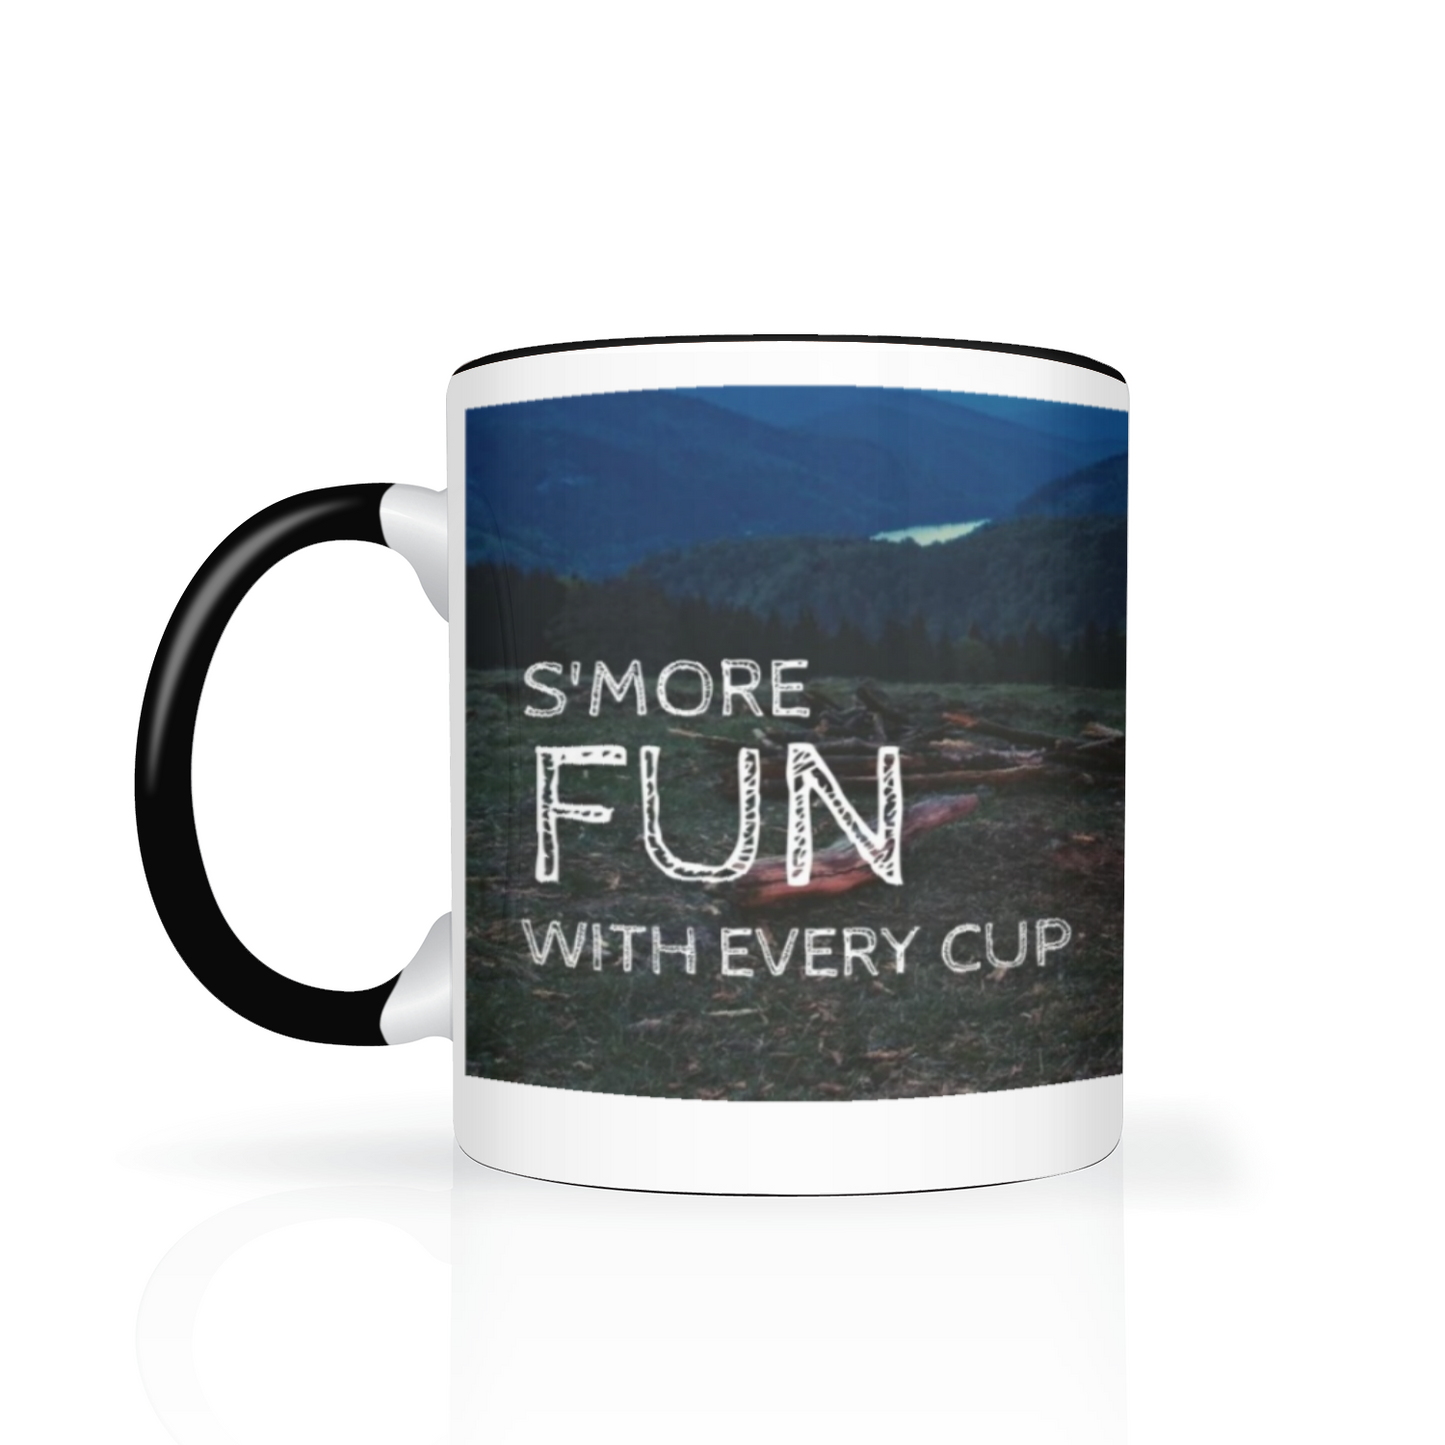 Indulge in the ultimate camping experience with our Smore Fun With Every Cup Two Toned Camping Mug! Feel the warmth of your hands as you wrap them around the mug, while enjoying delicious s'mores in every sip. Its durable and stylish design makes it the perfect companion for all your outdoor adventures.